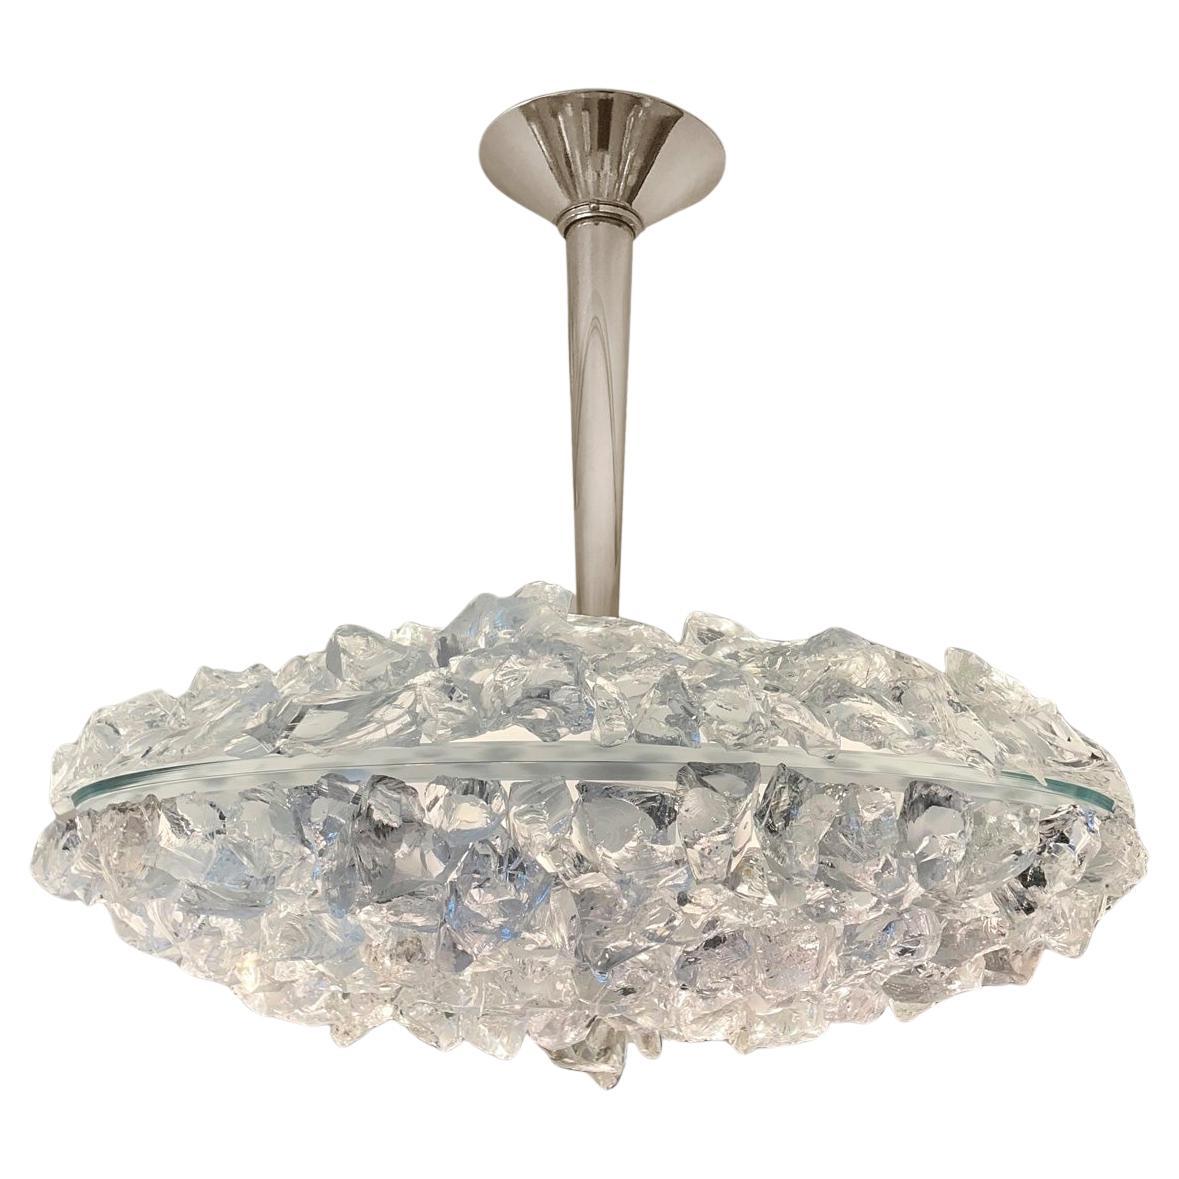 Matera Grande Ceiling Light by Gaspare Asaro-Polished Nickel Finish For Sale